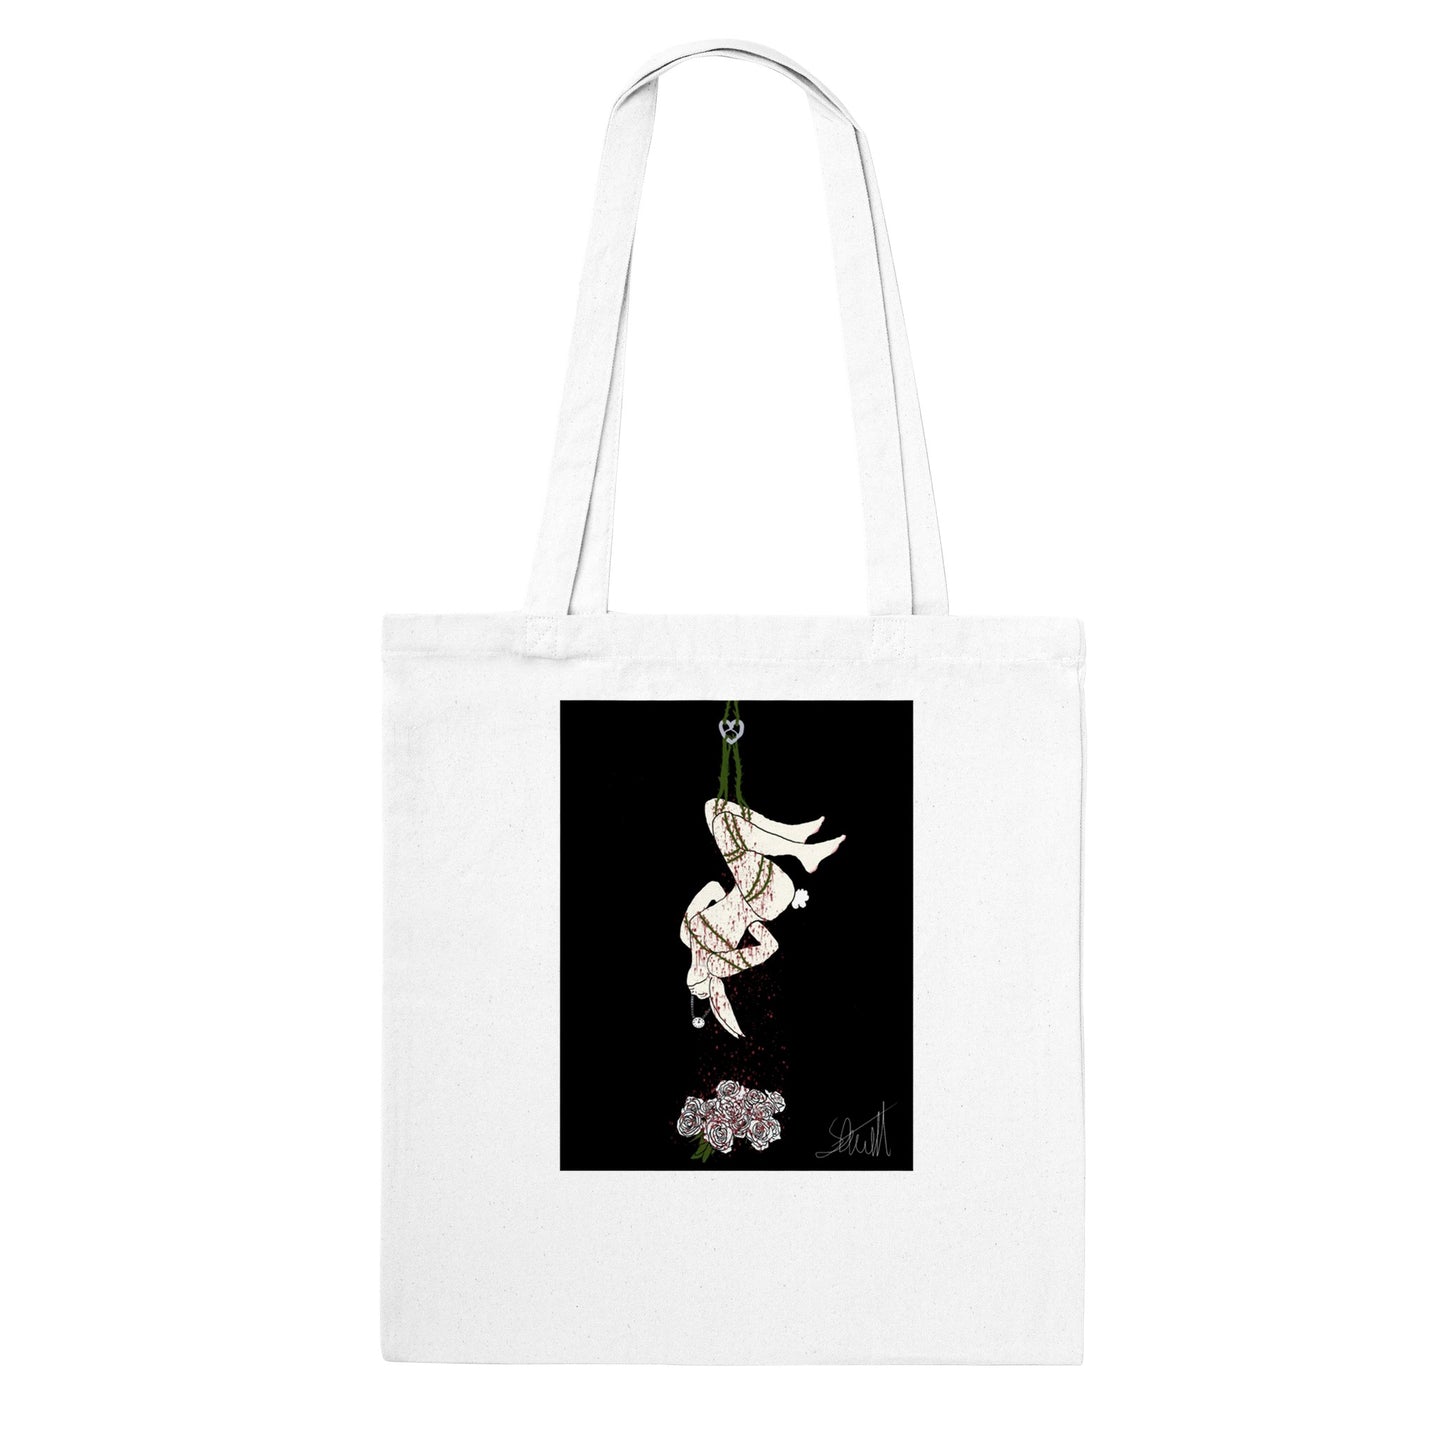 I Must Not Be Late - Classic Tote Bag